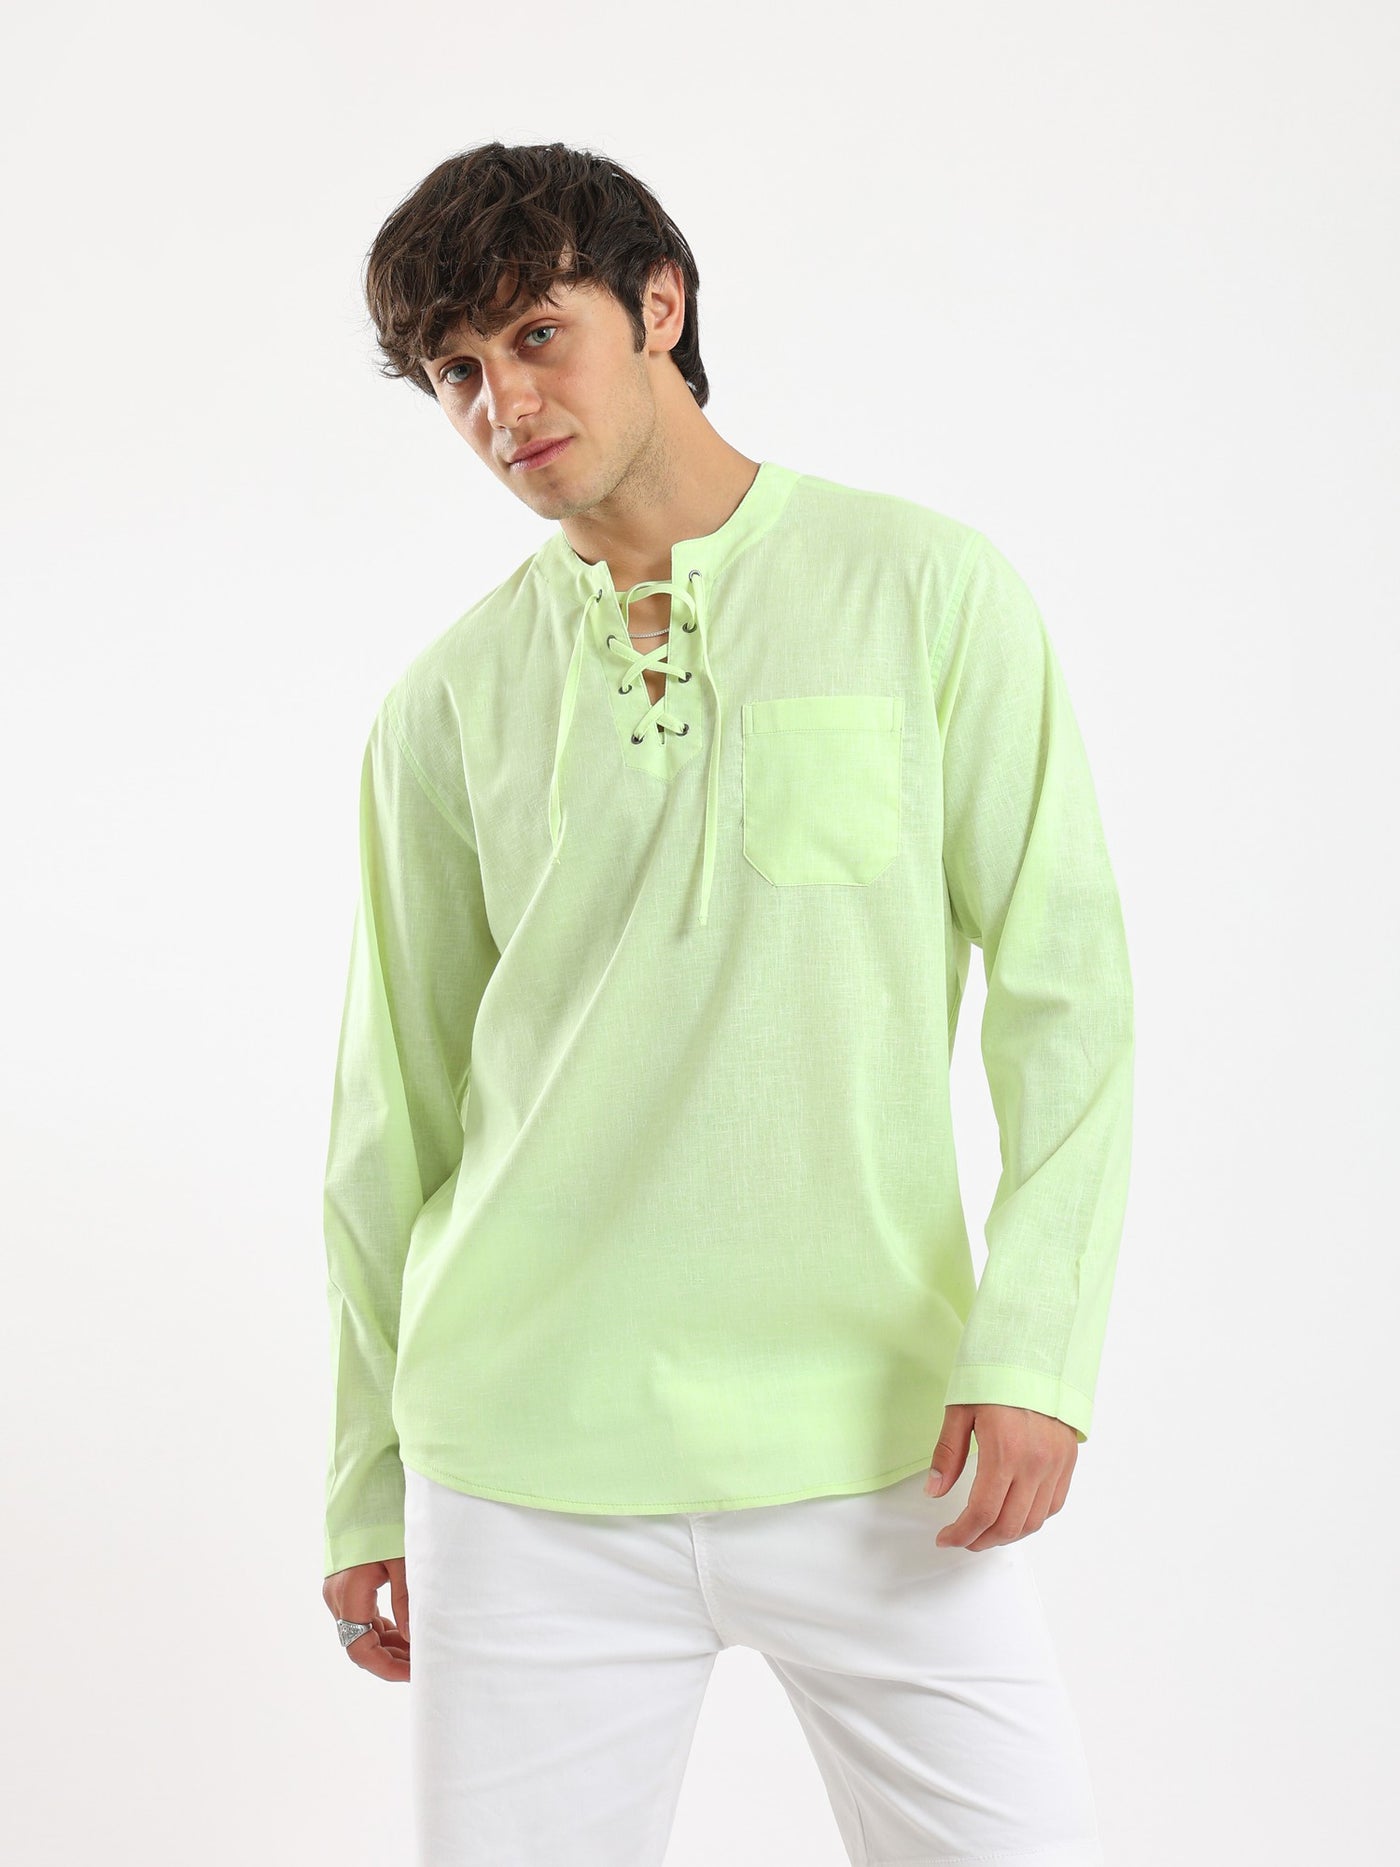 Shirt - Neck With Lace-Up - Long Sleeves